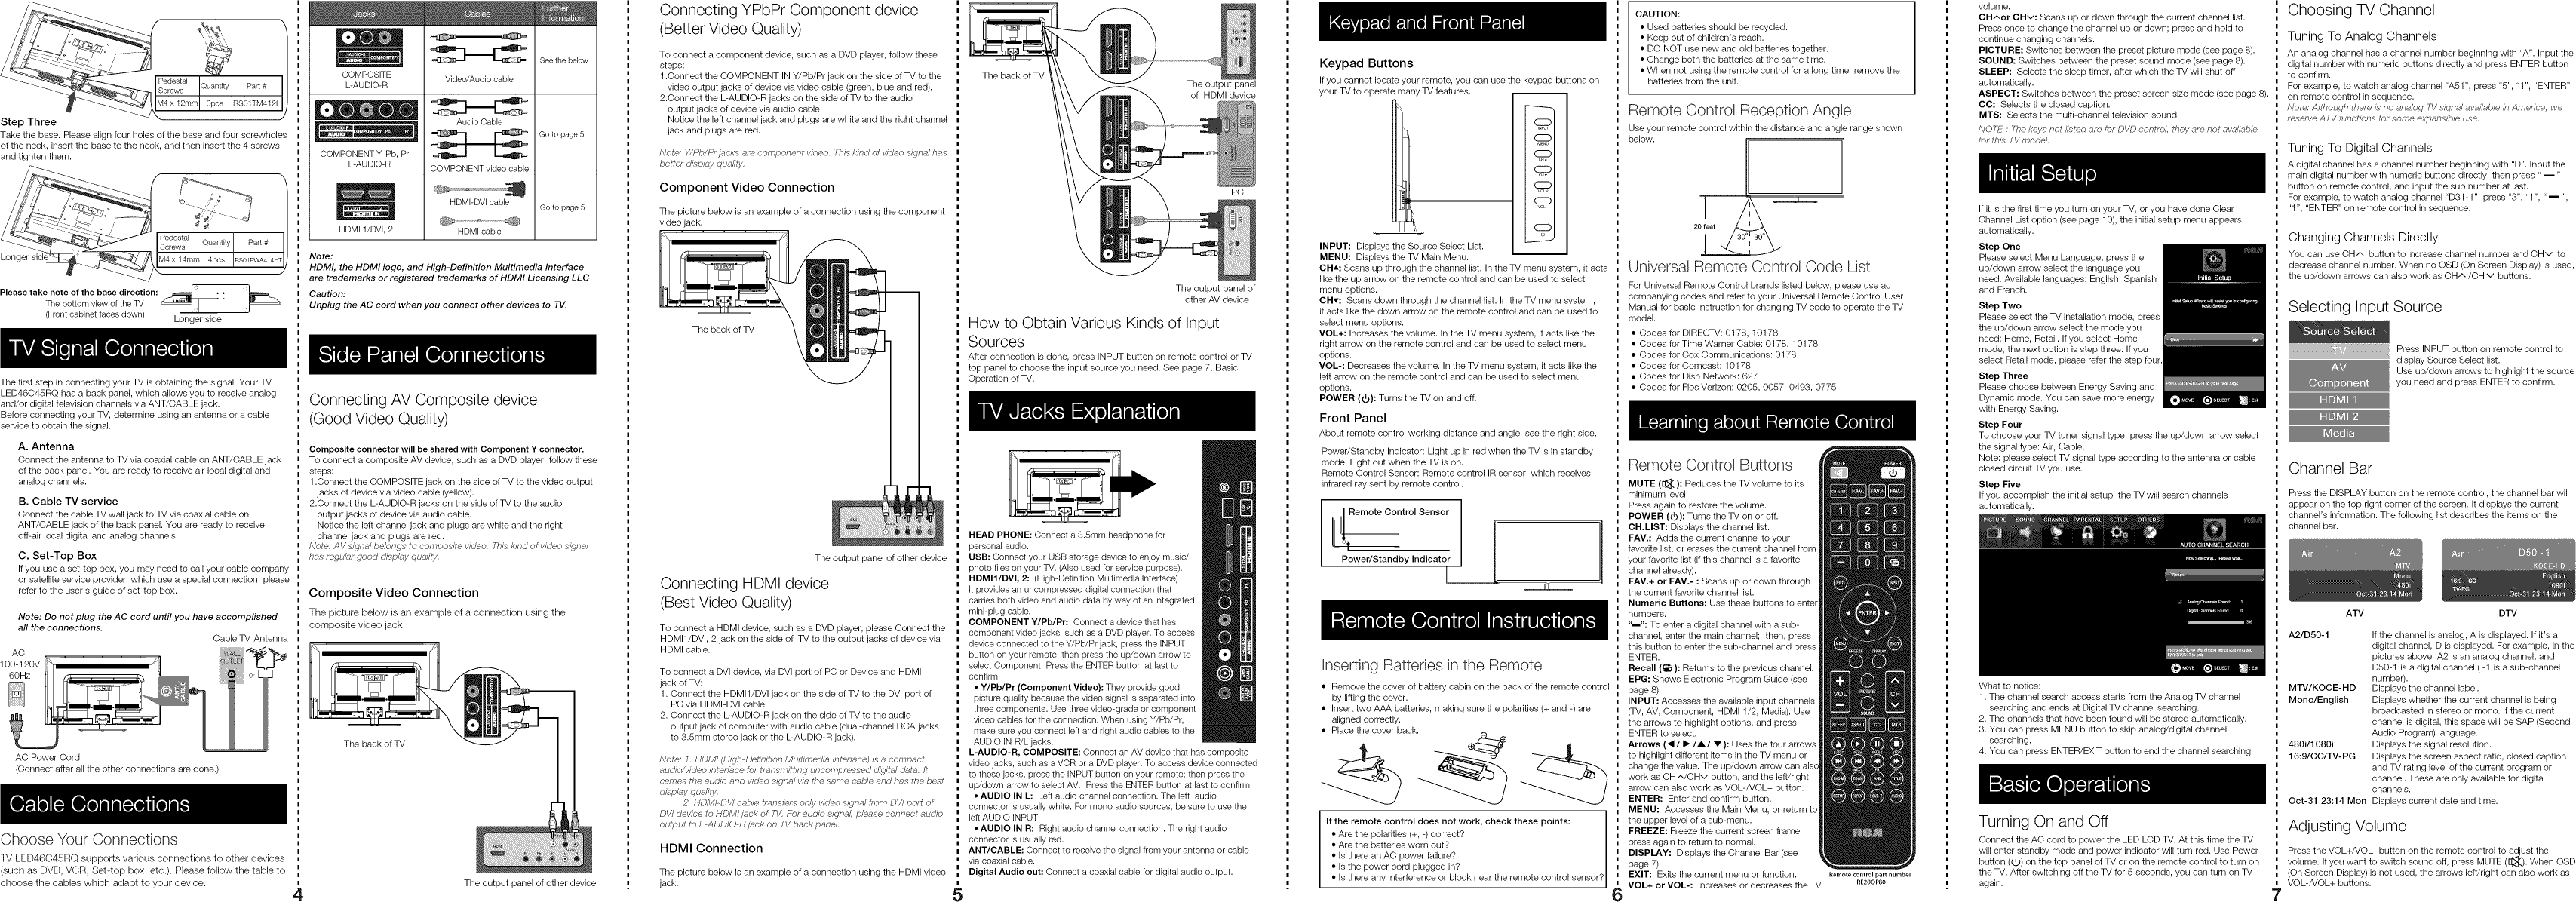 Page 2 of 4 - RCA LED46C45RQ 1212185L User Manual  LED TELEVISION - Manuals And Guides